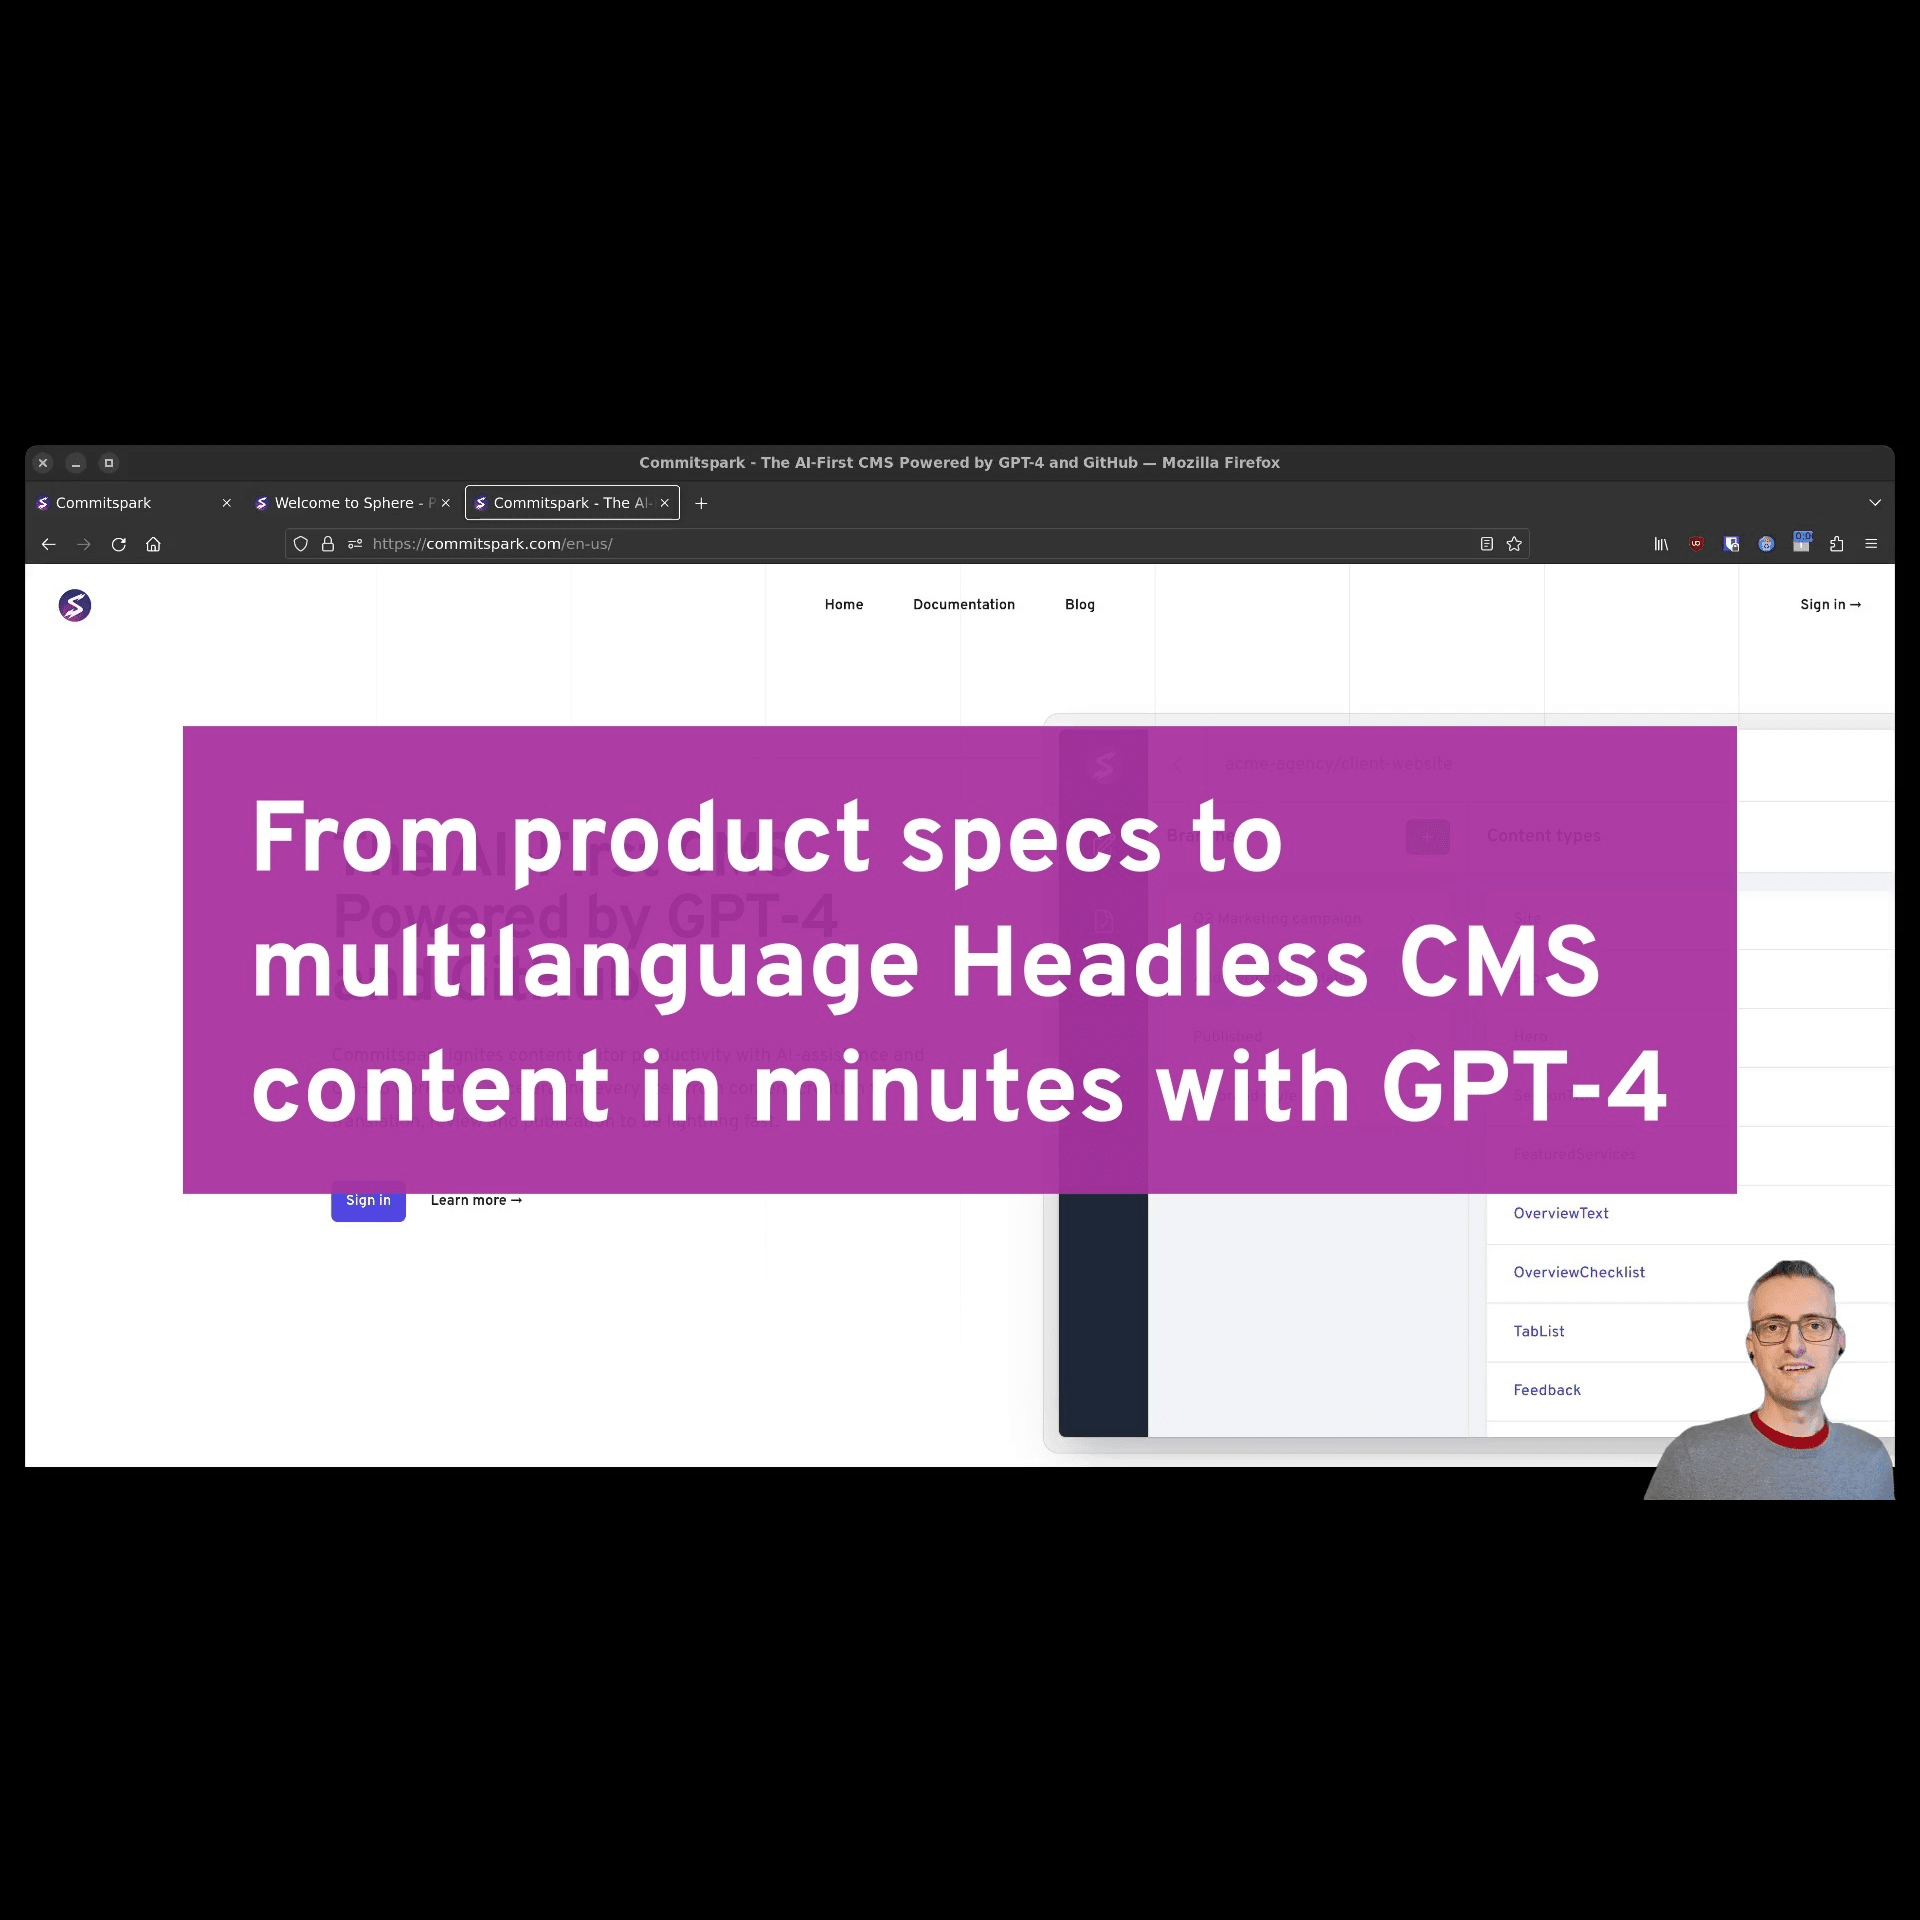 From Product Specs to Multilanguage Headless Content with GPT-4